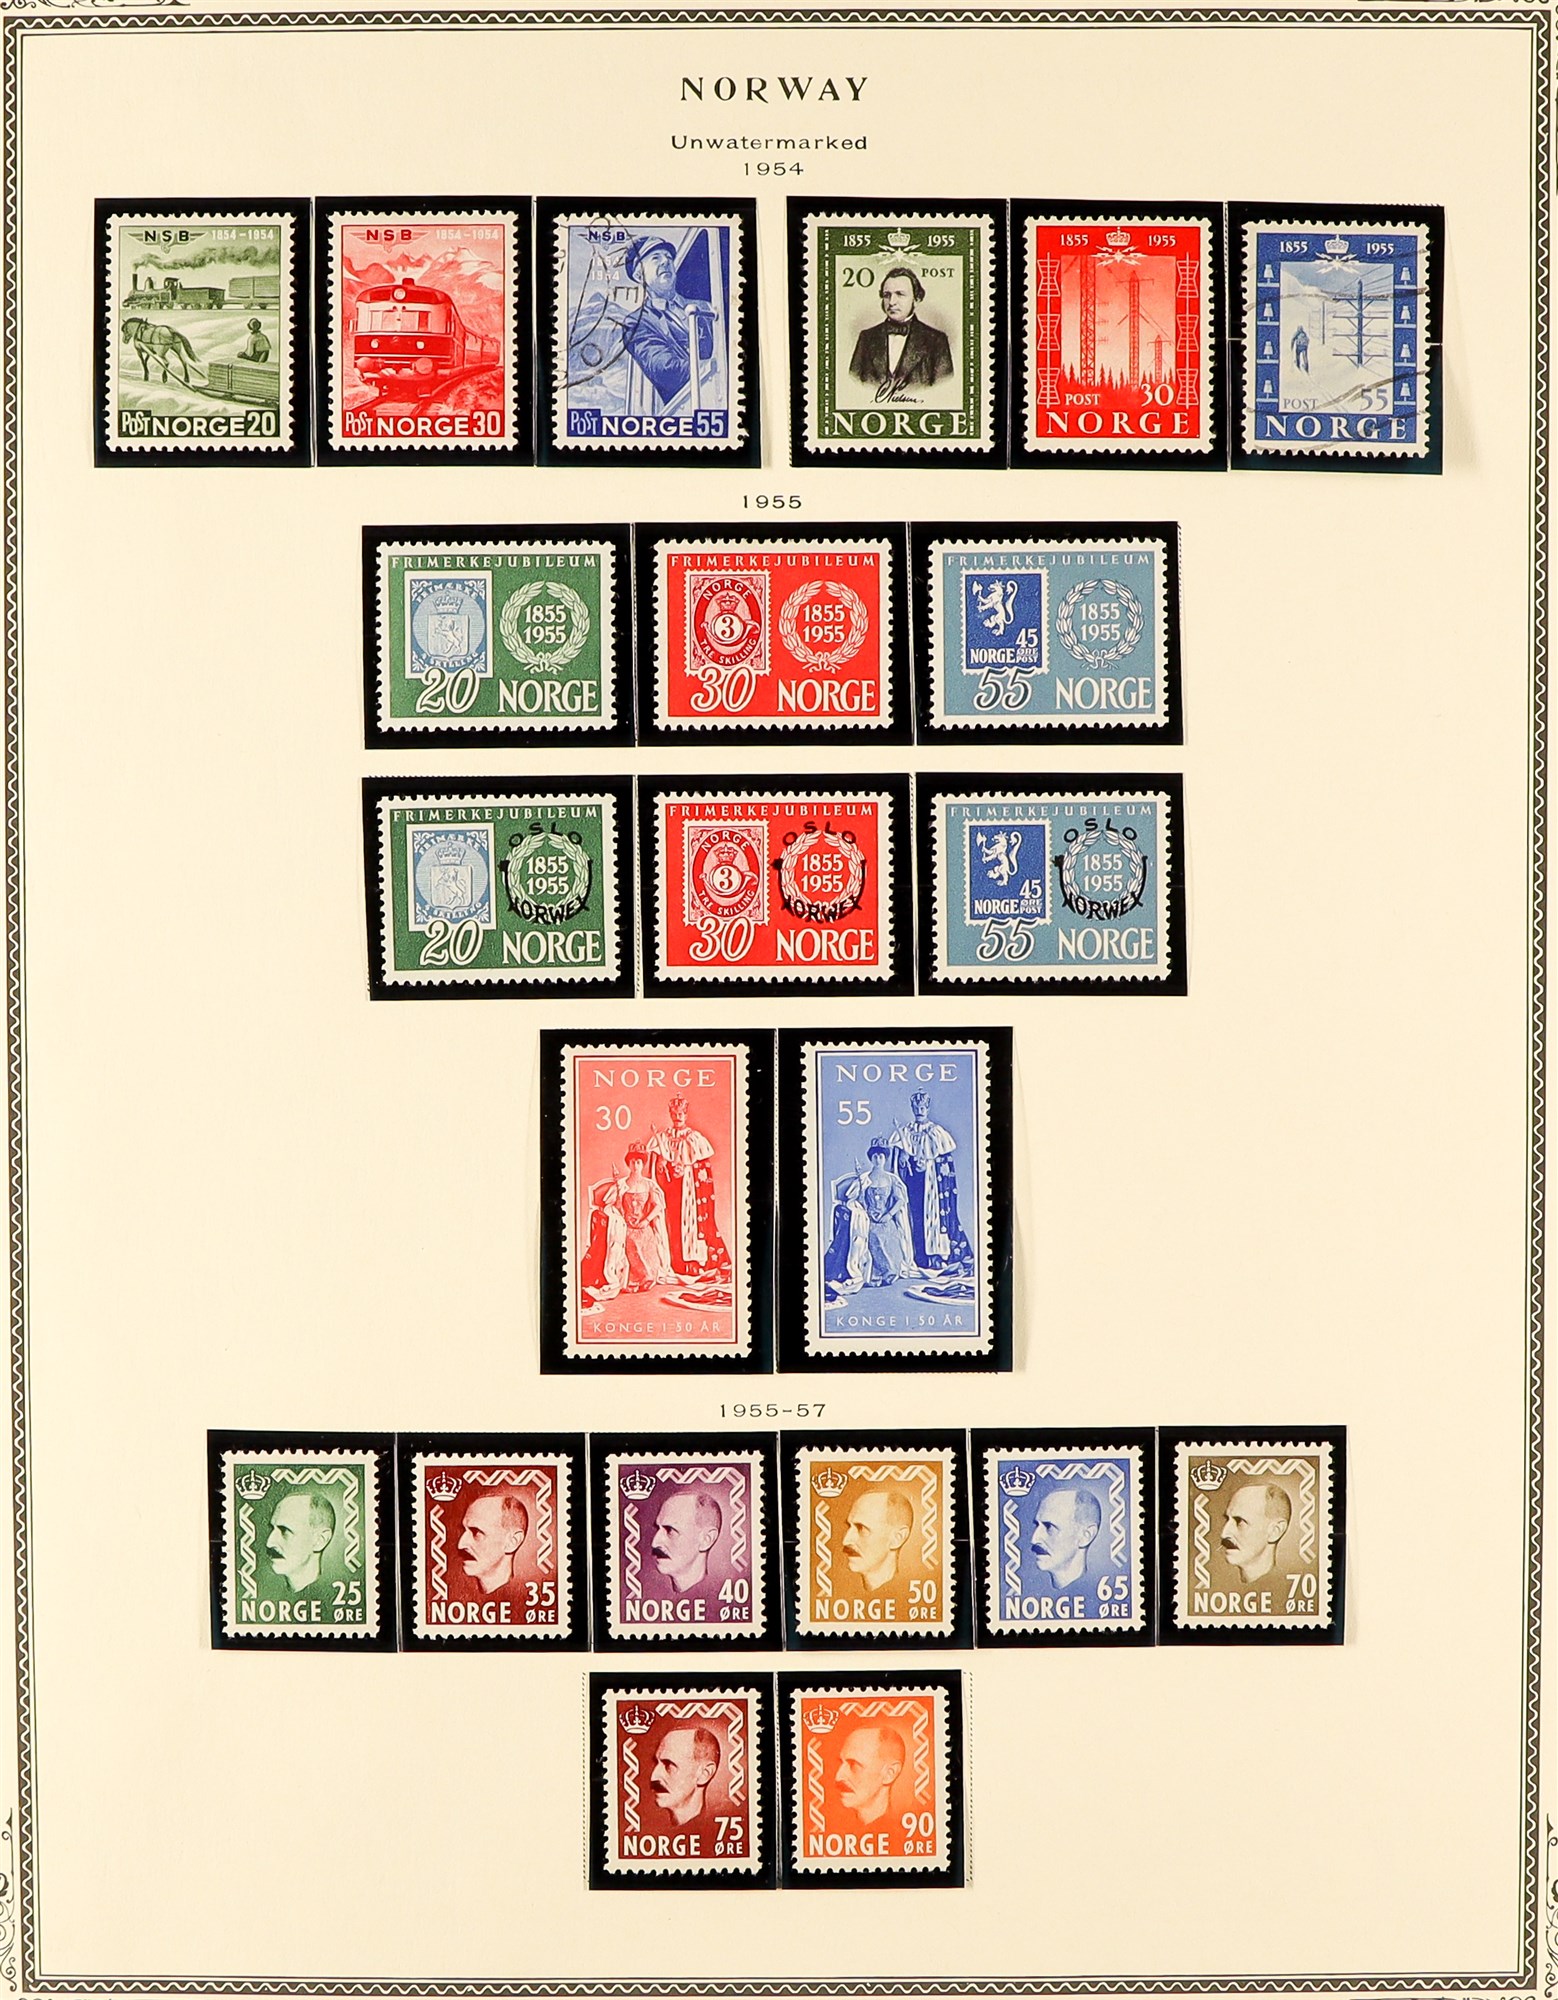 NORWAY 1855 - 1988 COLLECTION of stamps in Scott Specialty album (pages to 2002) of mint / never - Image 10 of 16